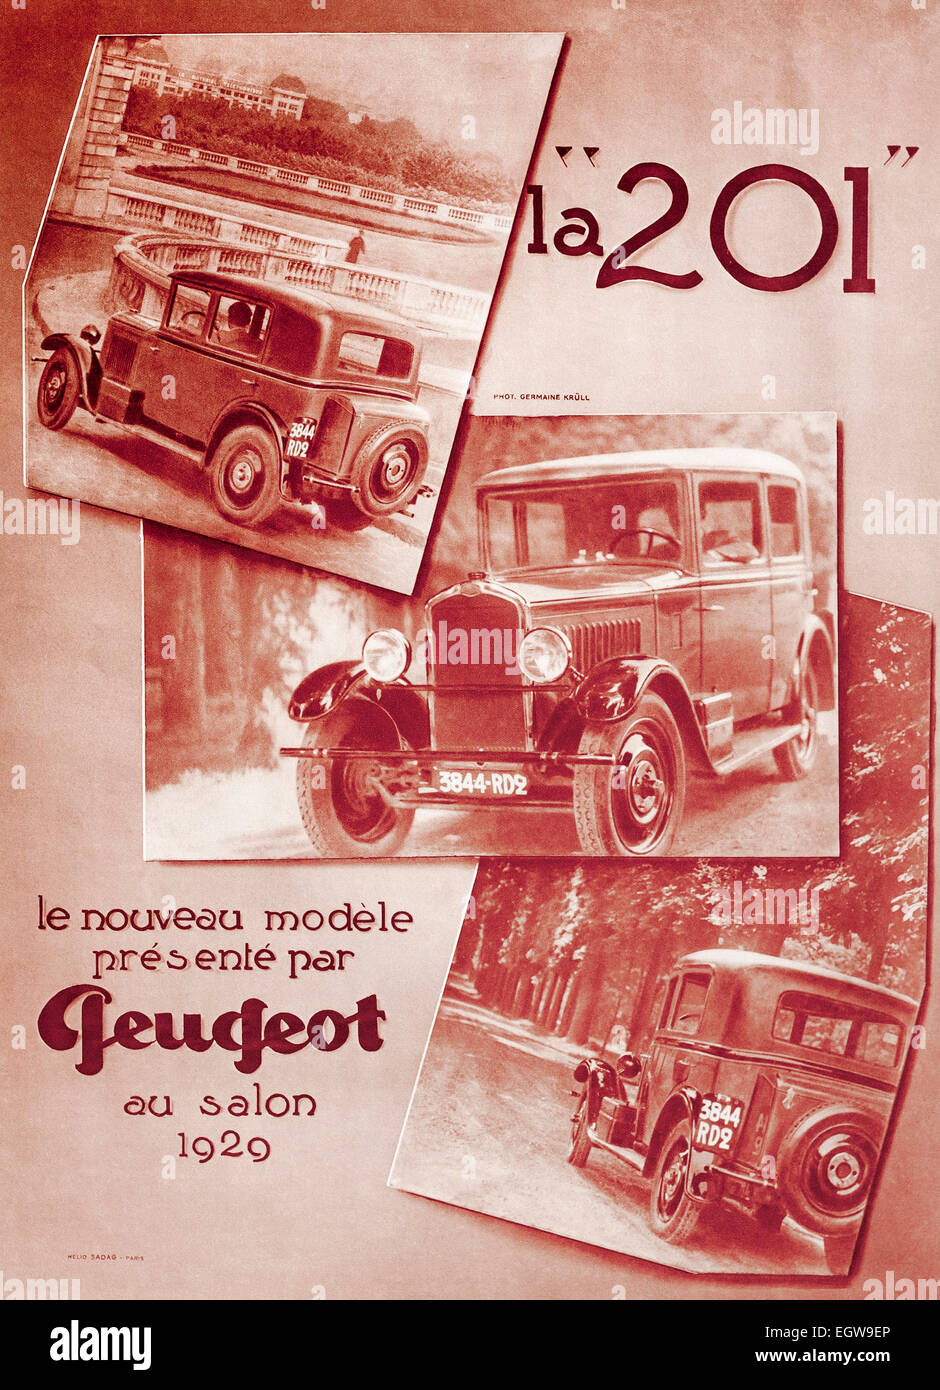 1929 advert for “Peugeot 201” car from French “L’Illustration” magazine. Stock Photo